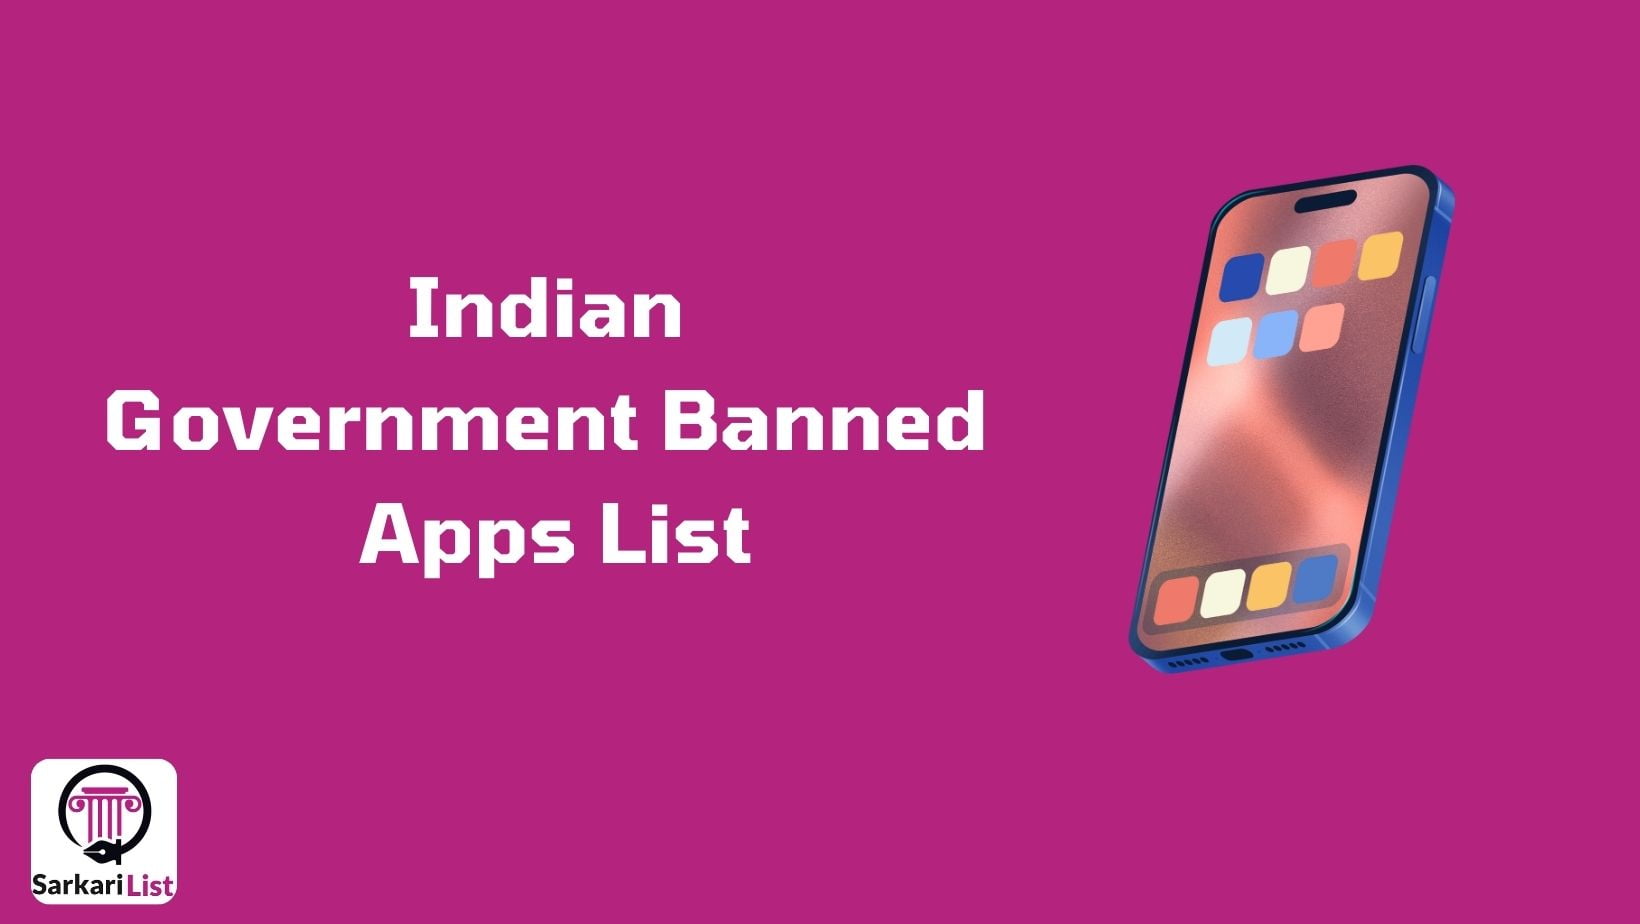 Indian Government Banned Apps List